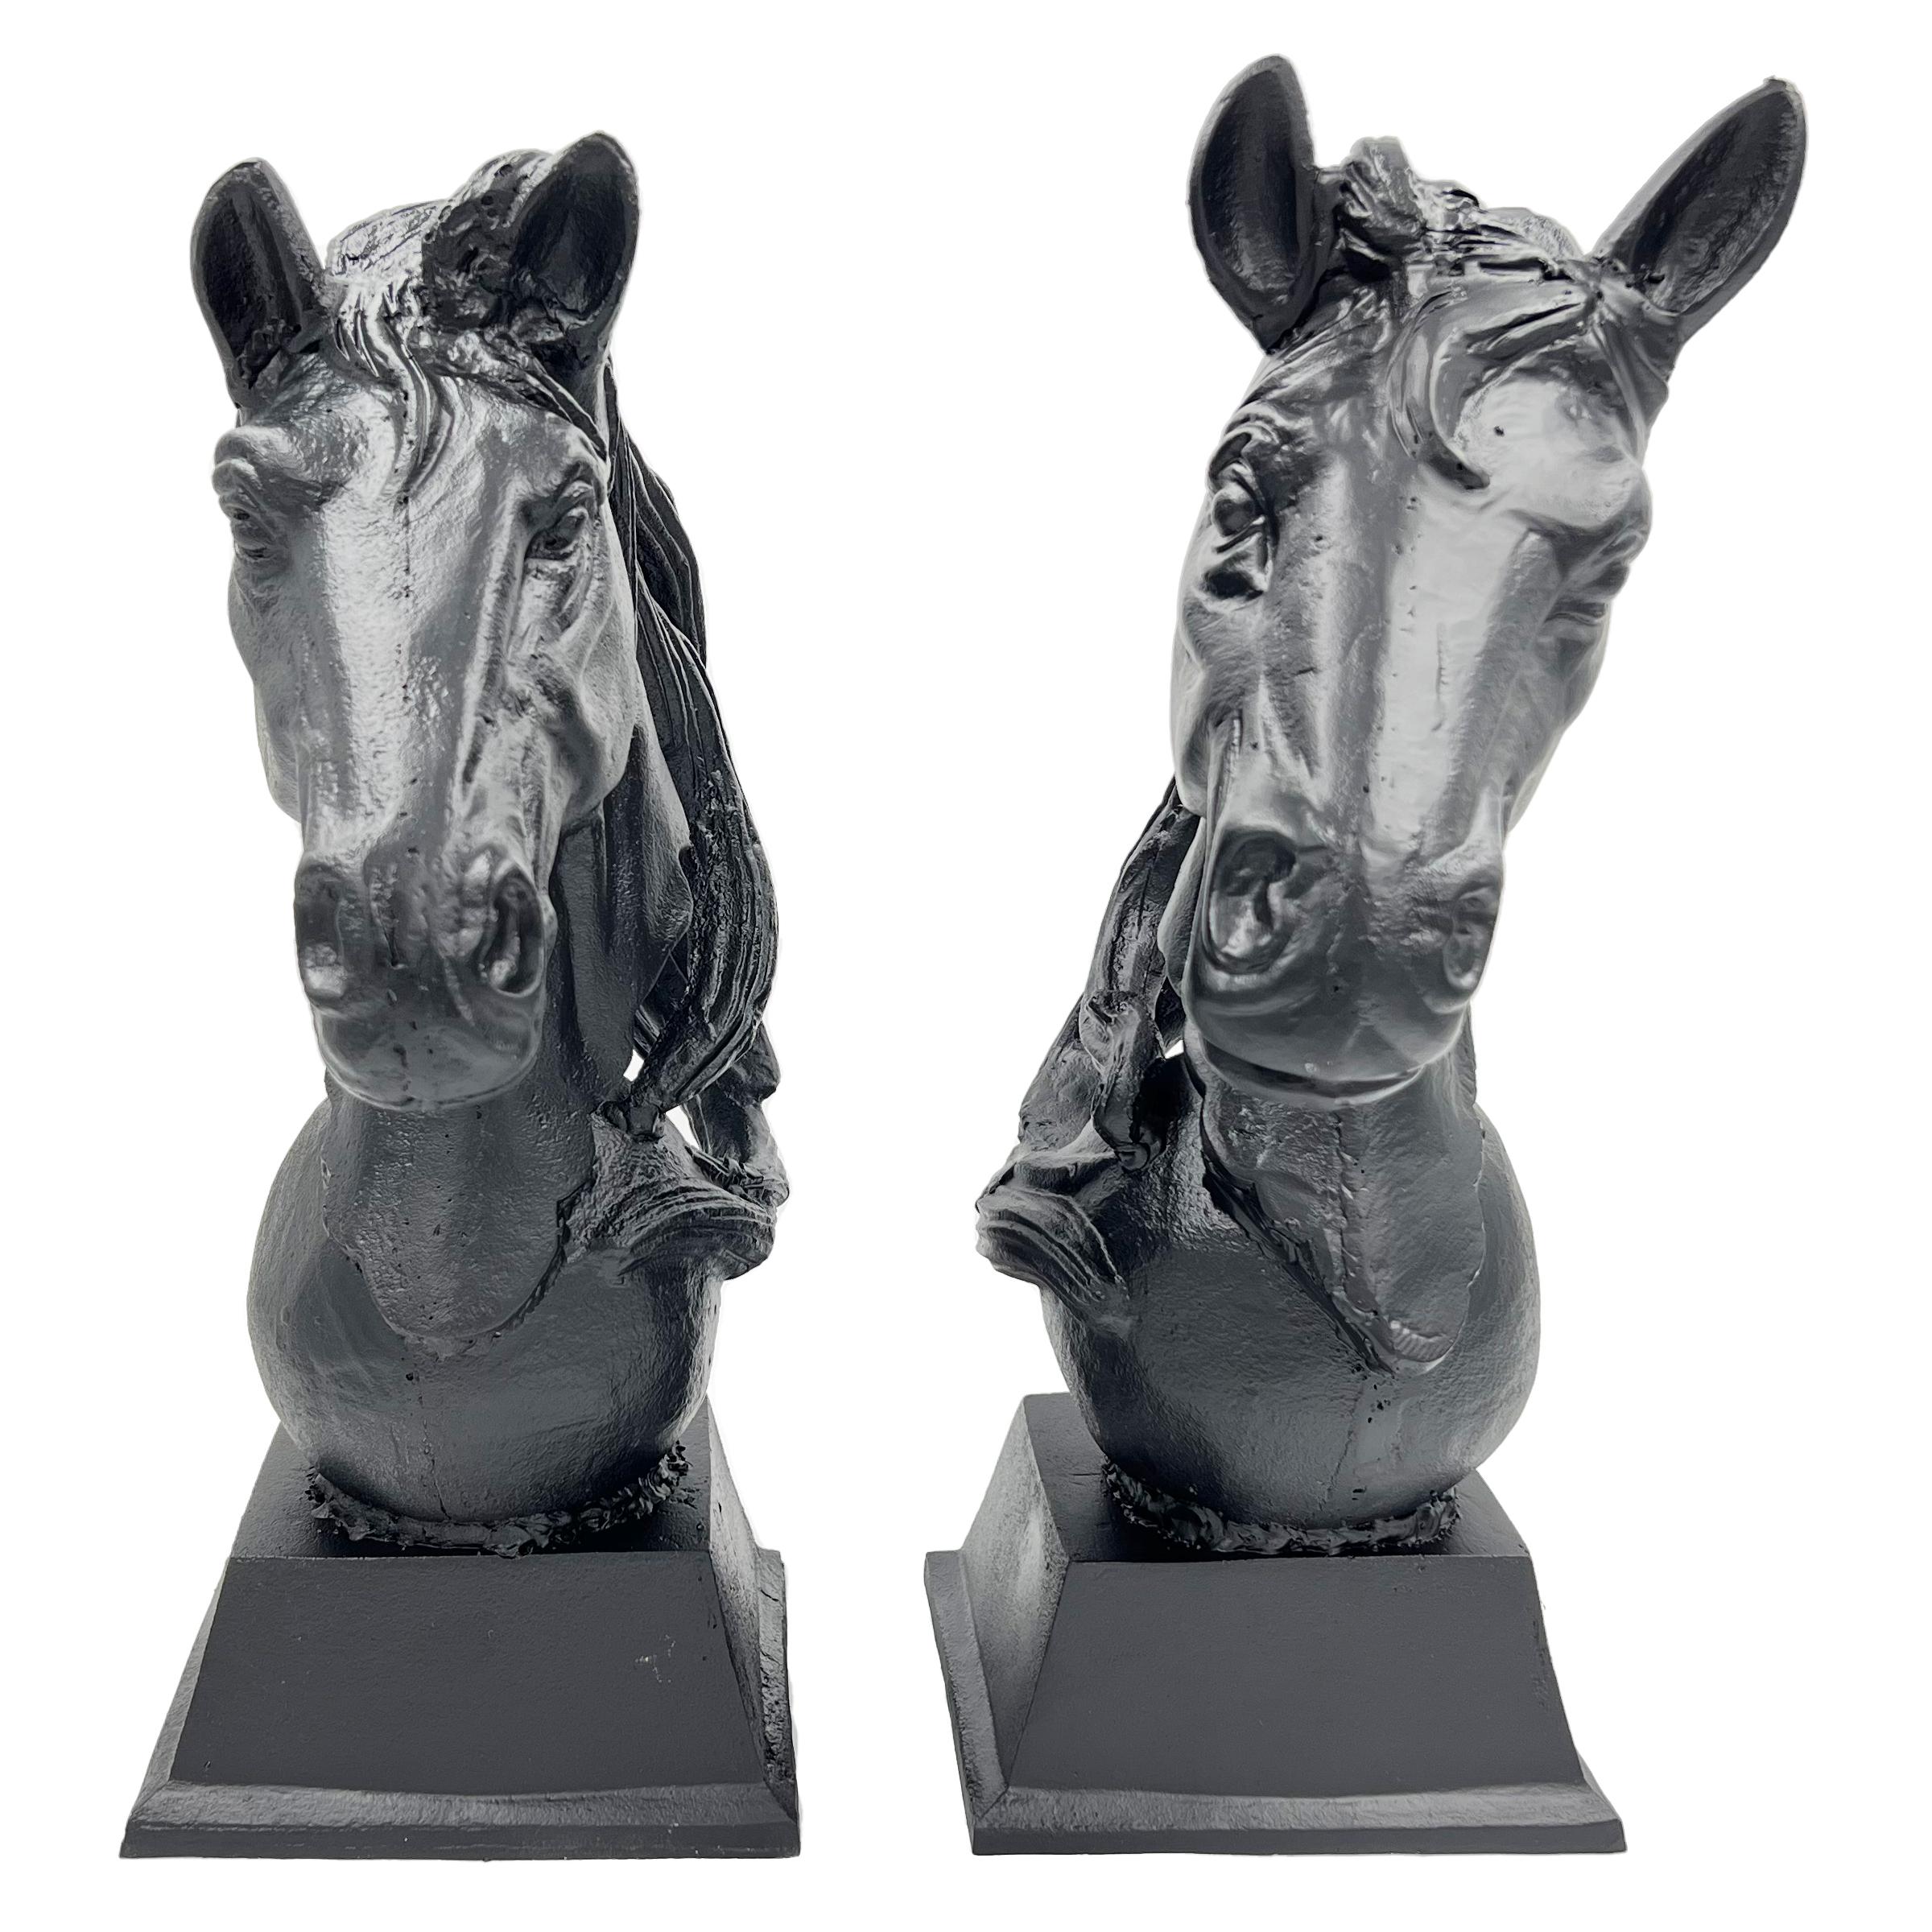 Exquisite metal horse busts form a captivating matching pair that hails from the mid-20th century, In a sleek and elegant black colour. Each horse bust is skillfully raised on a round ball shape, which, in turn, rests gracefully atop a square base,